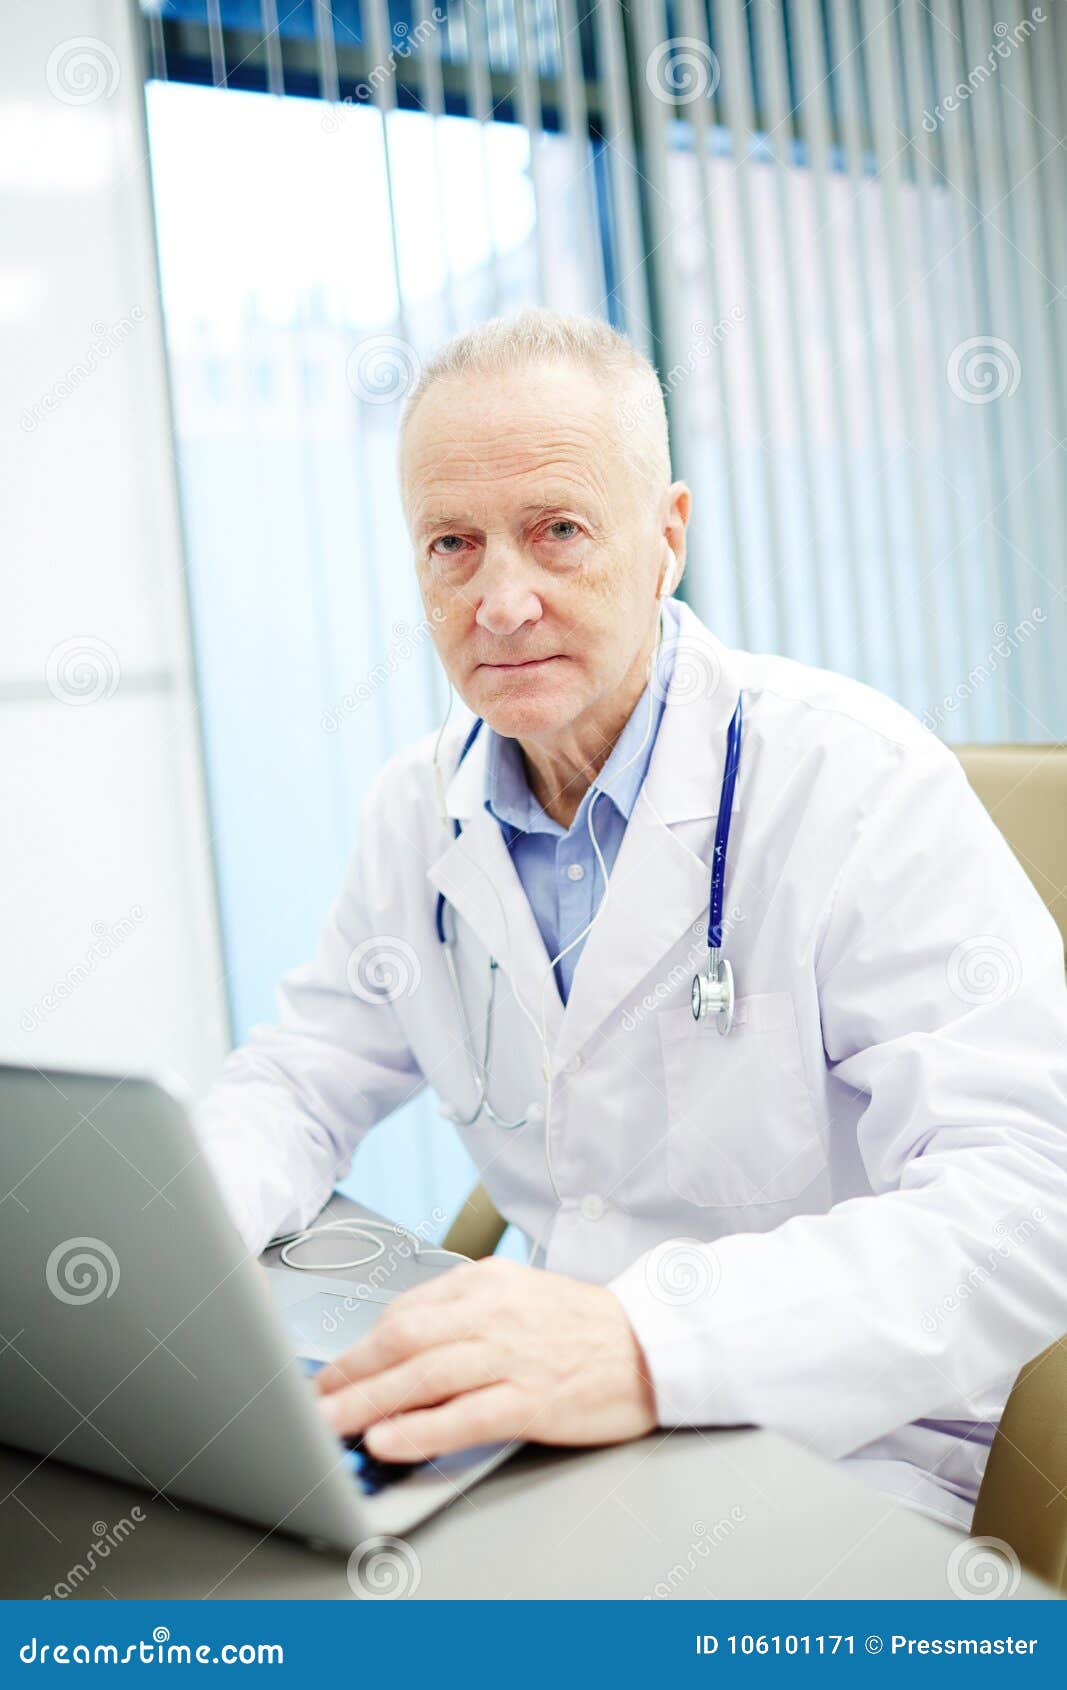 Online consultation stock image. Image of practitioner - 106101171